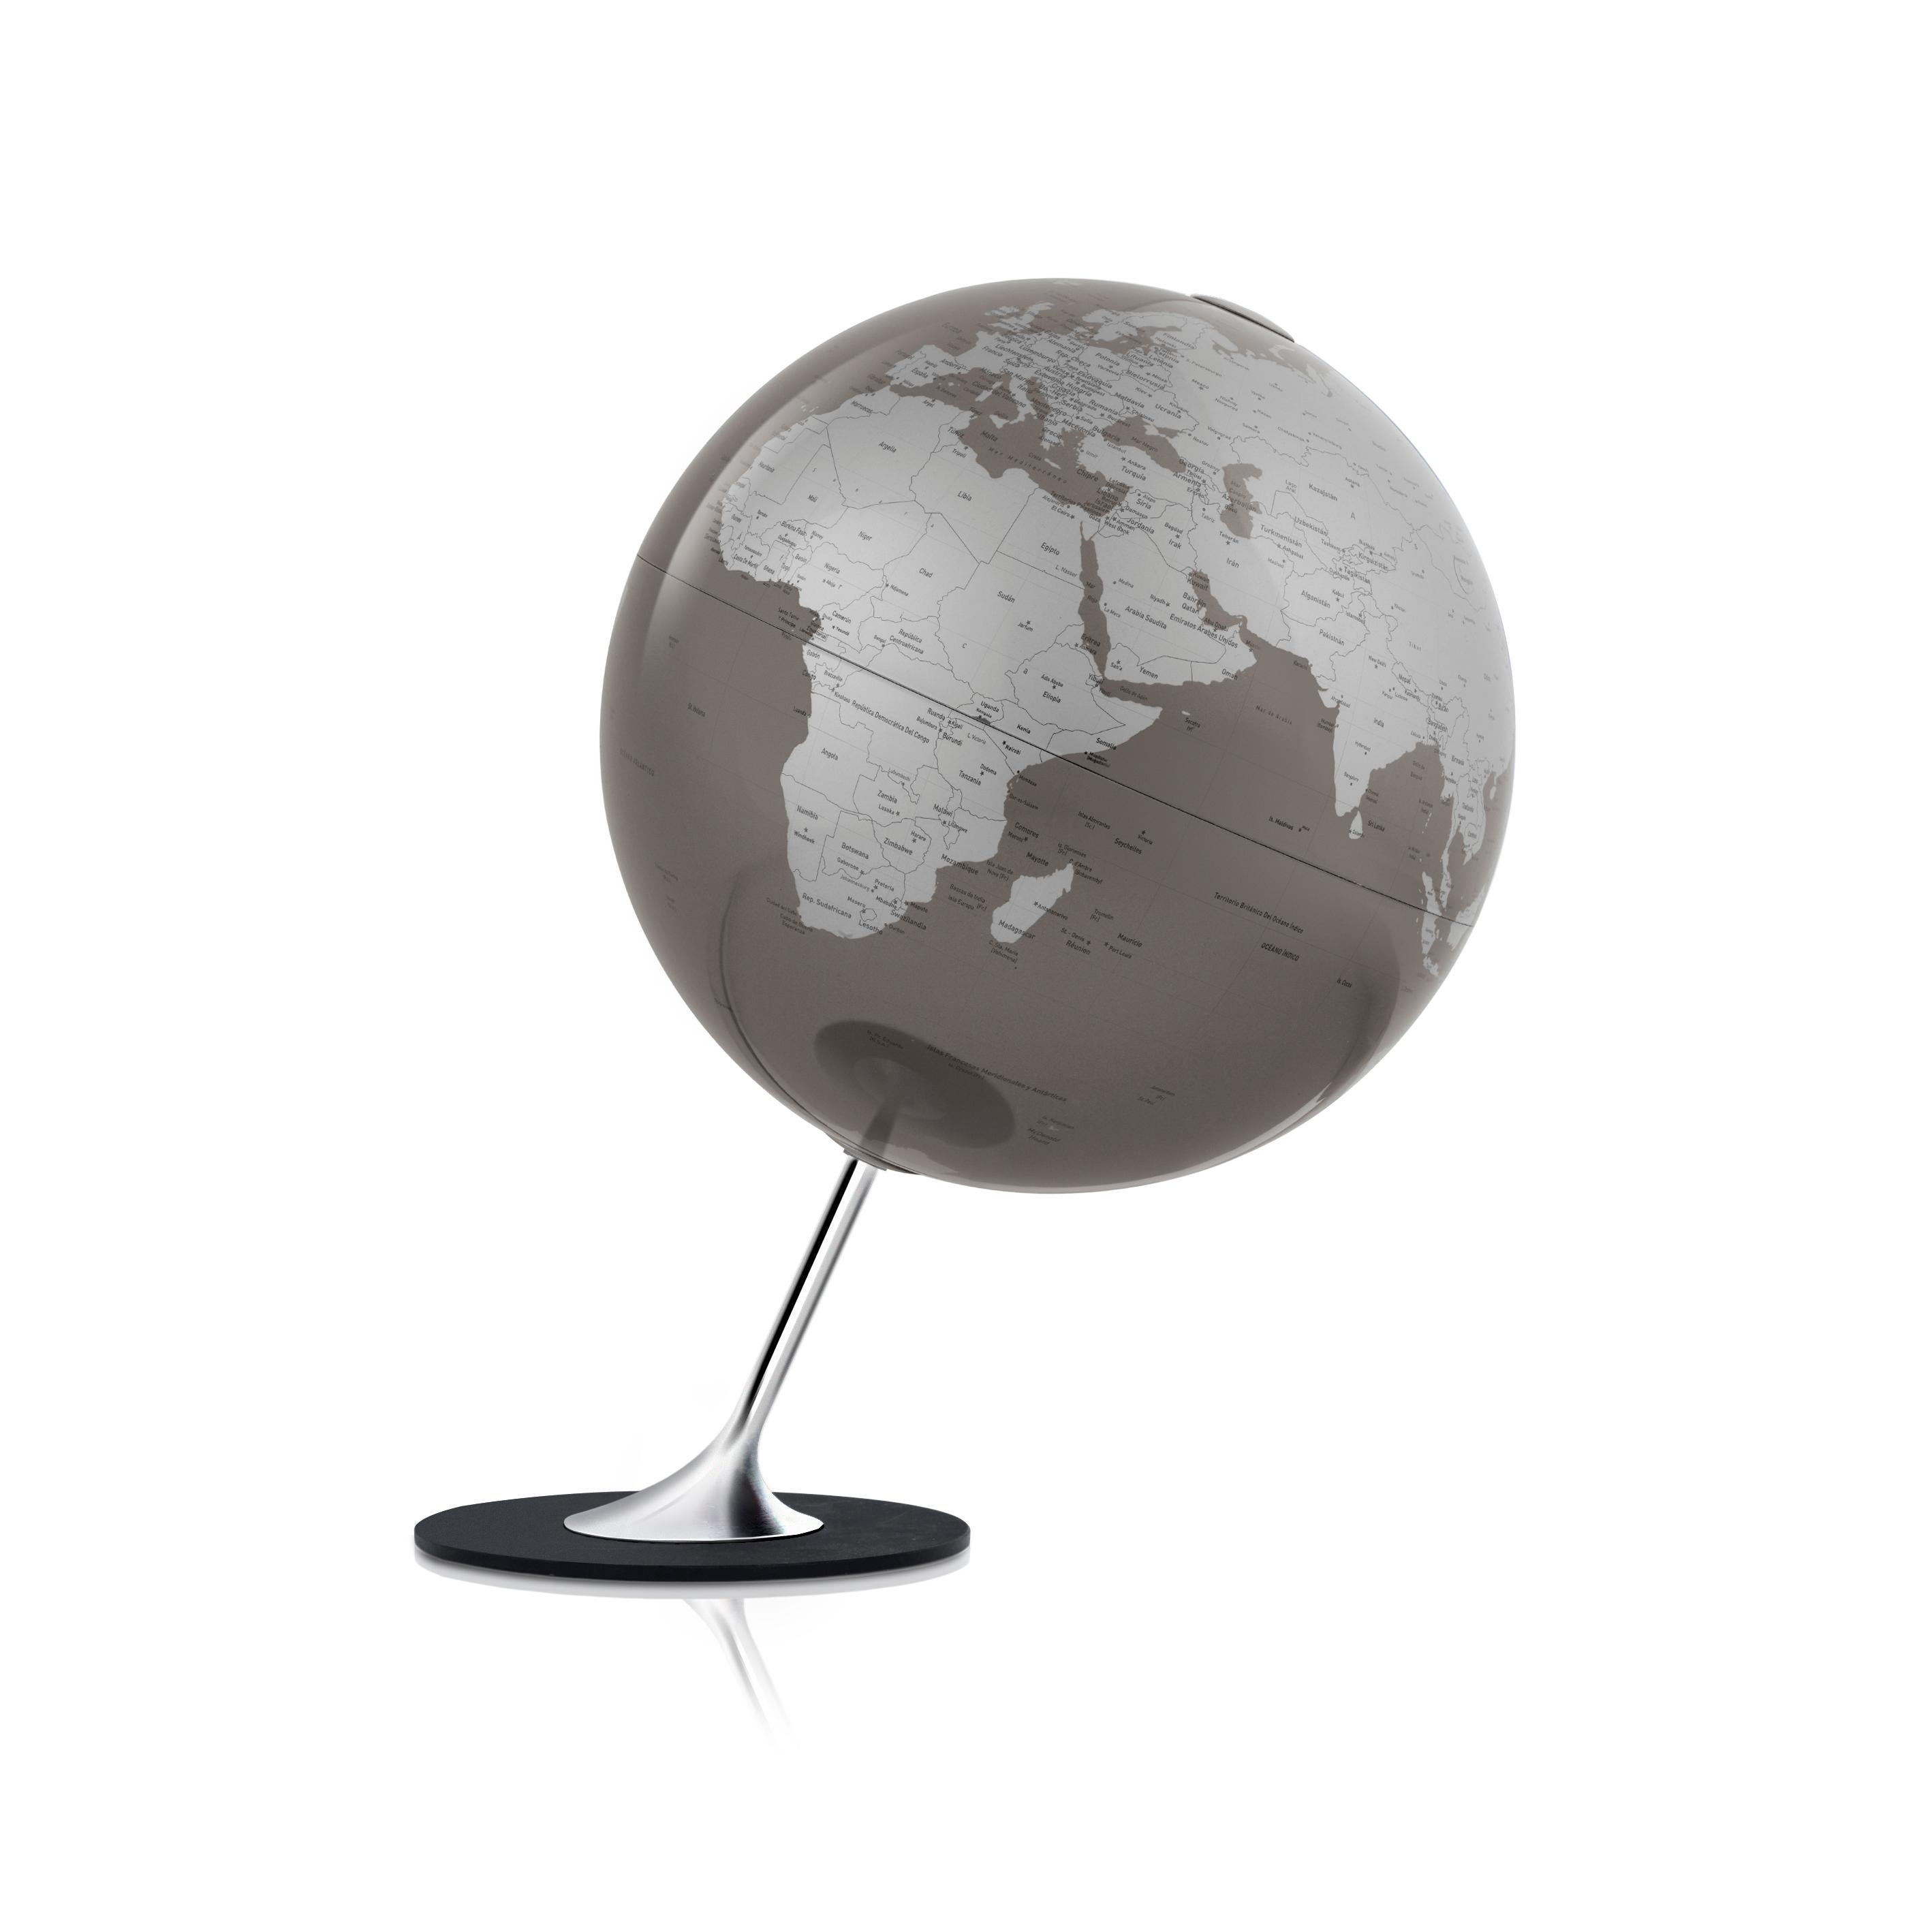 Atmosphere's Swing Globes are far from the traditional globes found in history class. Made from aluminum with a rubber self-righting base, this Globe has been specially fabricated to really get into the swing of things. Its chic white gray color